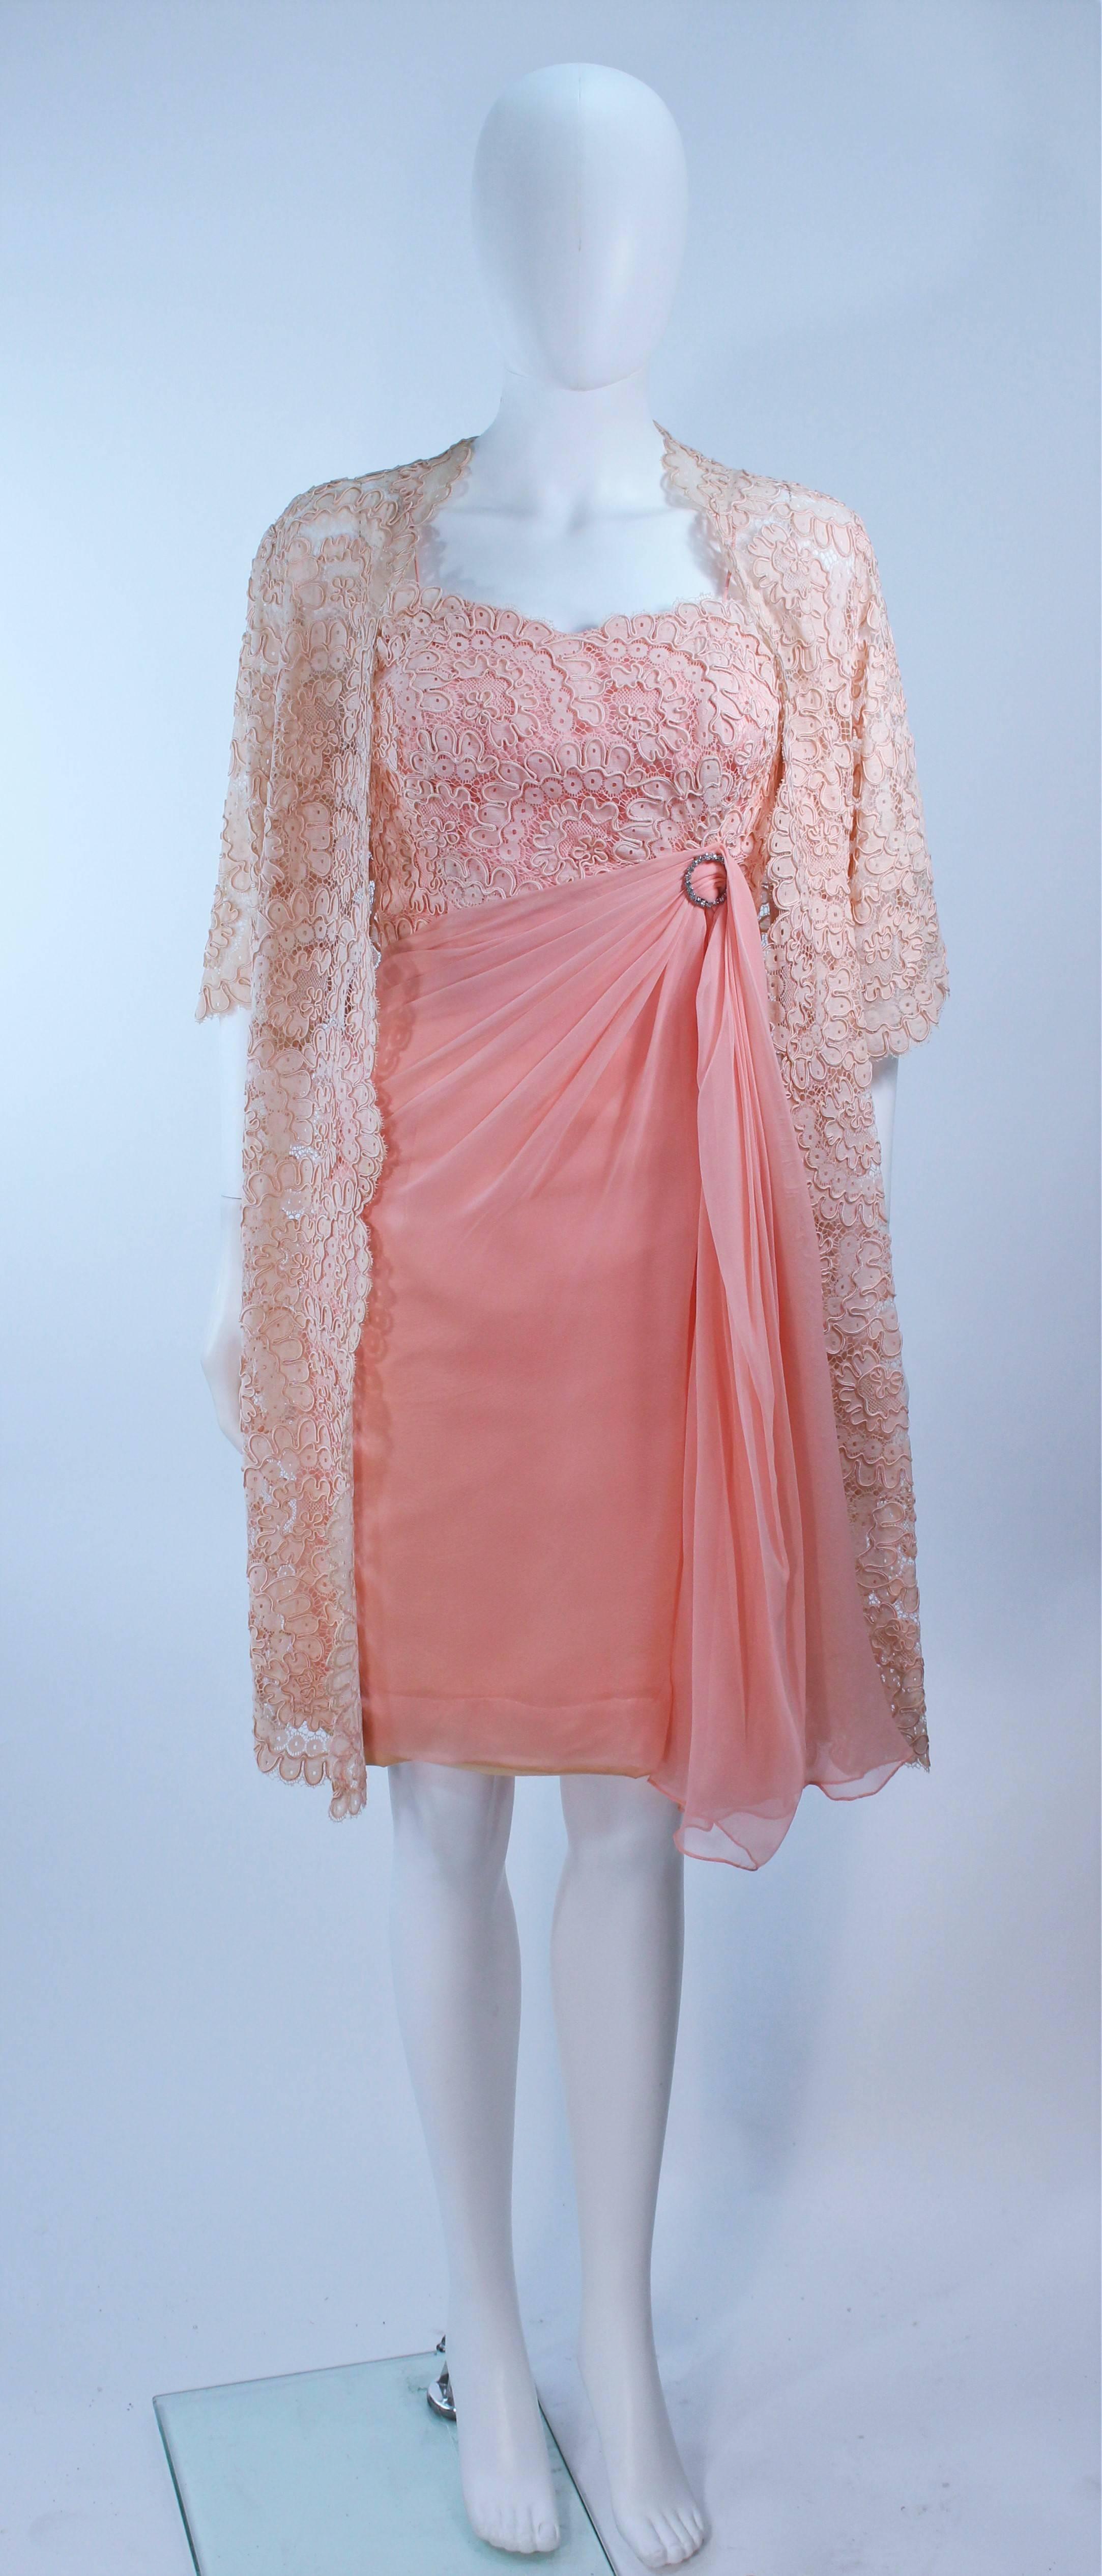  This ensemble is composed of a pink hue combination of lace and chiffon The dress features a lace bodice with a chiffon skirt. There is a center back zipper closure. The coat is an open style. In great vintage condition.

  **Please